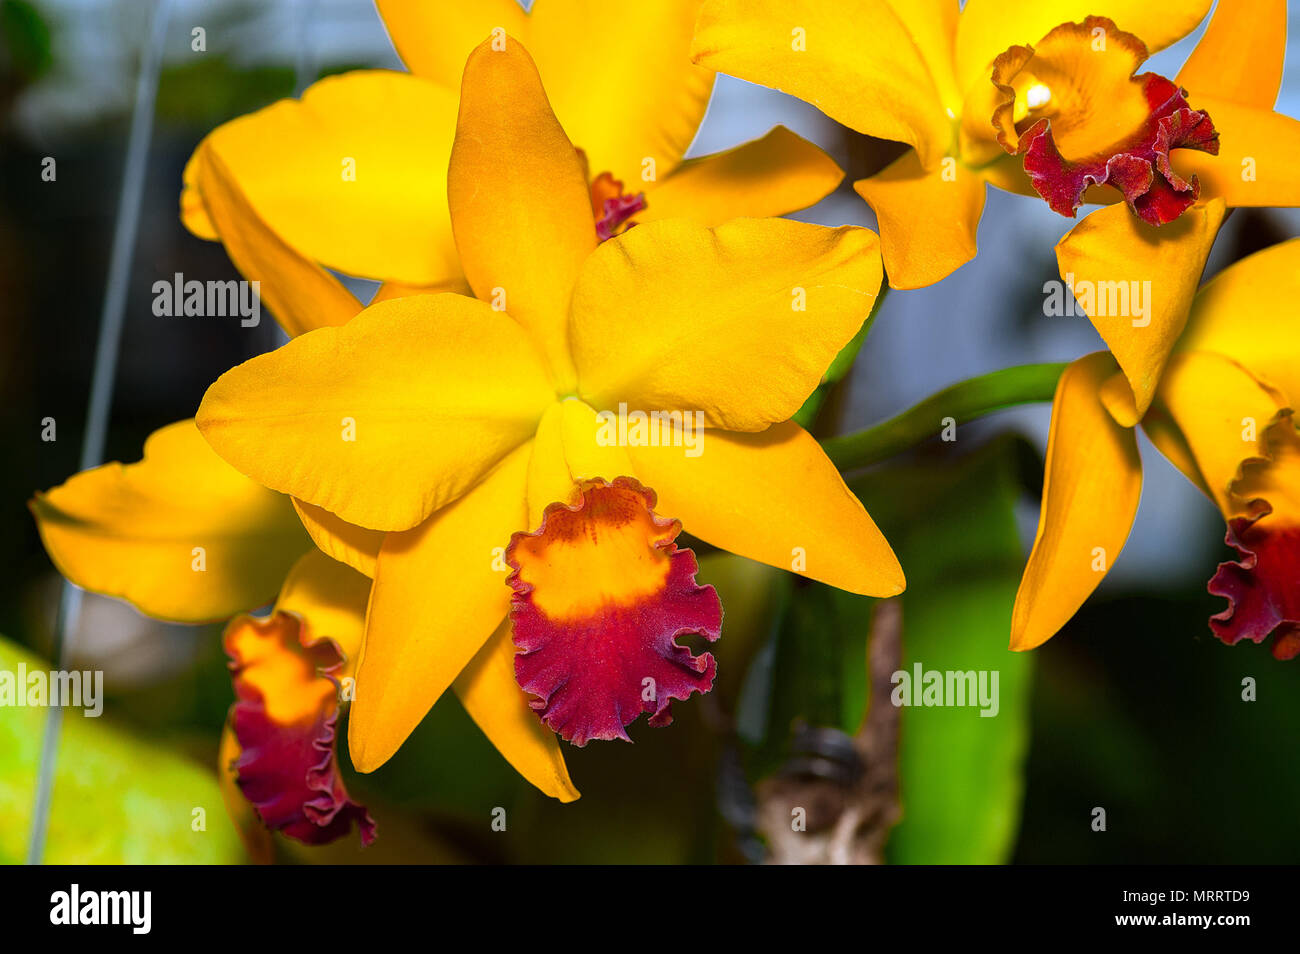 Cattleya Jomthong Dellight is an orange yellow orchid with yellow and purple-red lip. Stock Photo